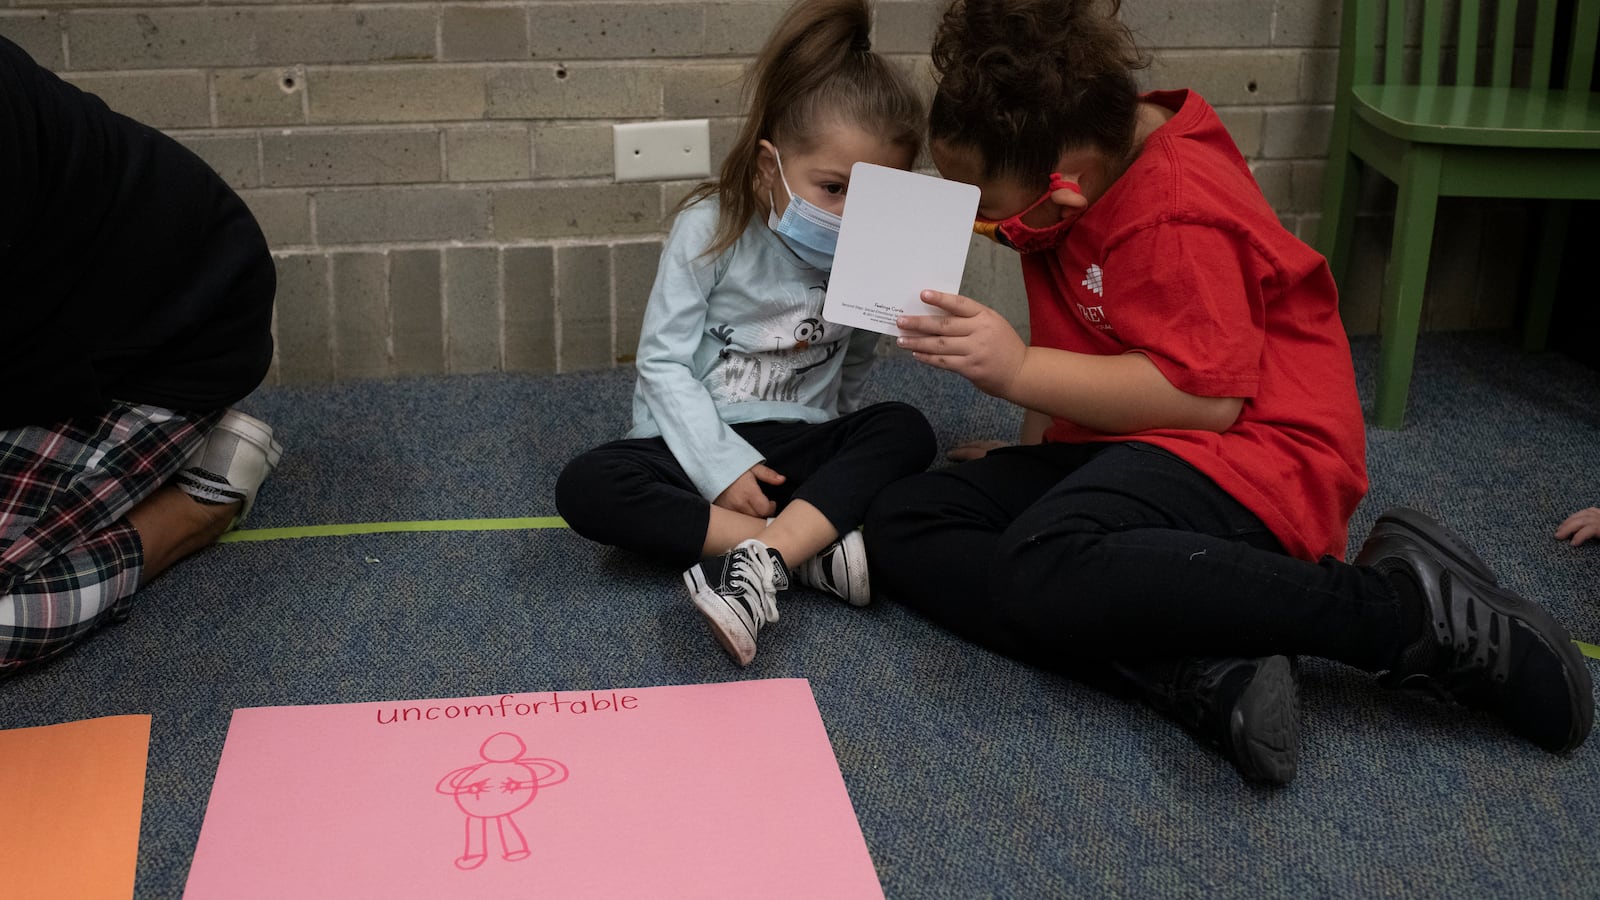 Two young girls hold up a card as they talk during a social-emotional learning lesson. They sit on a grey carpet, and there is a drawing in front of them on pink paper that says “uncomfortable” with a drawing of a person holding their abdomen.